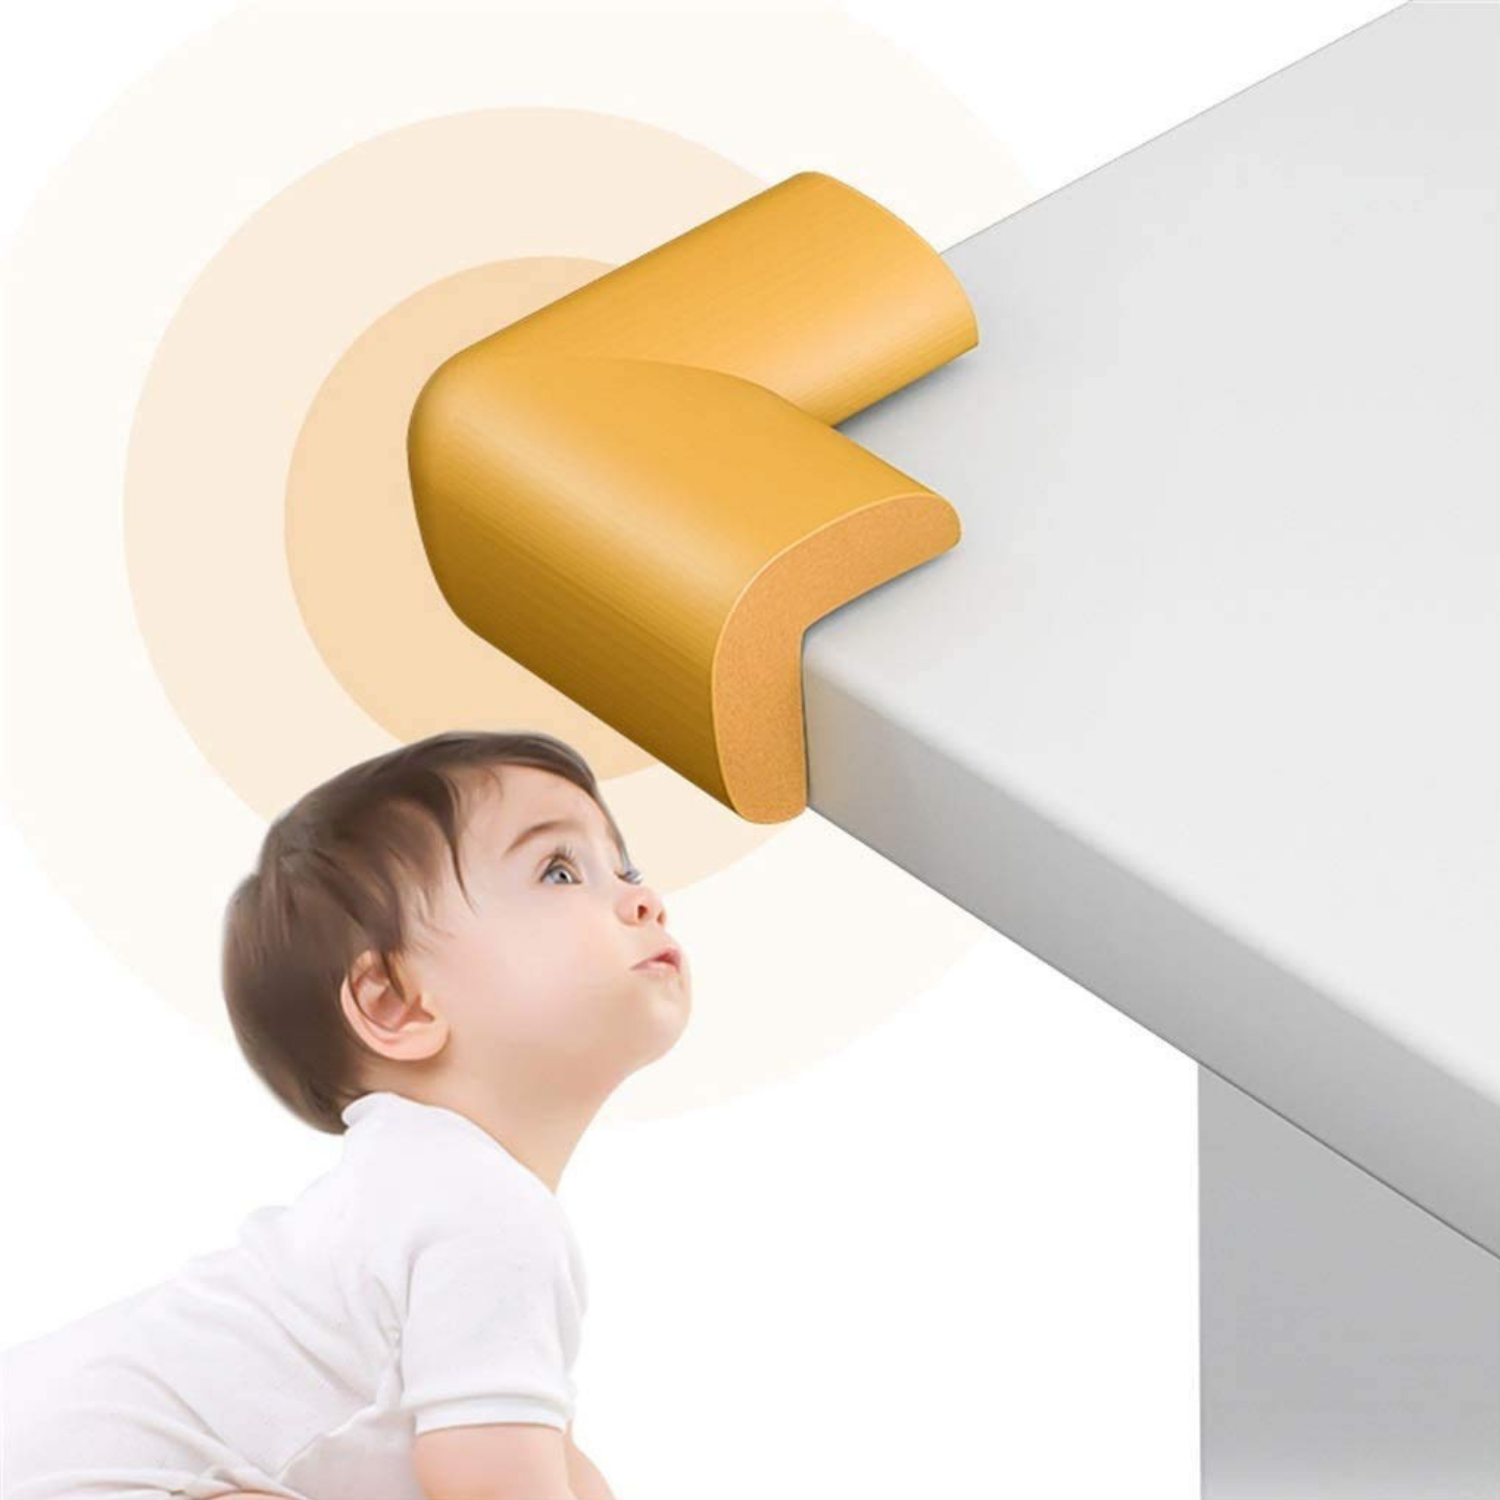 Baby proofing collection from Wudore.com